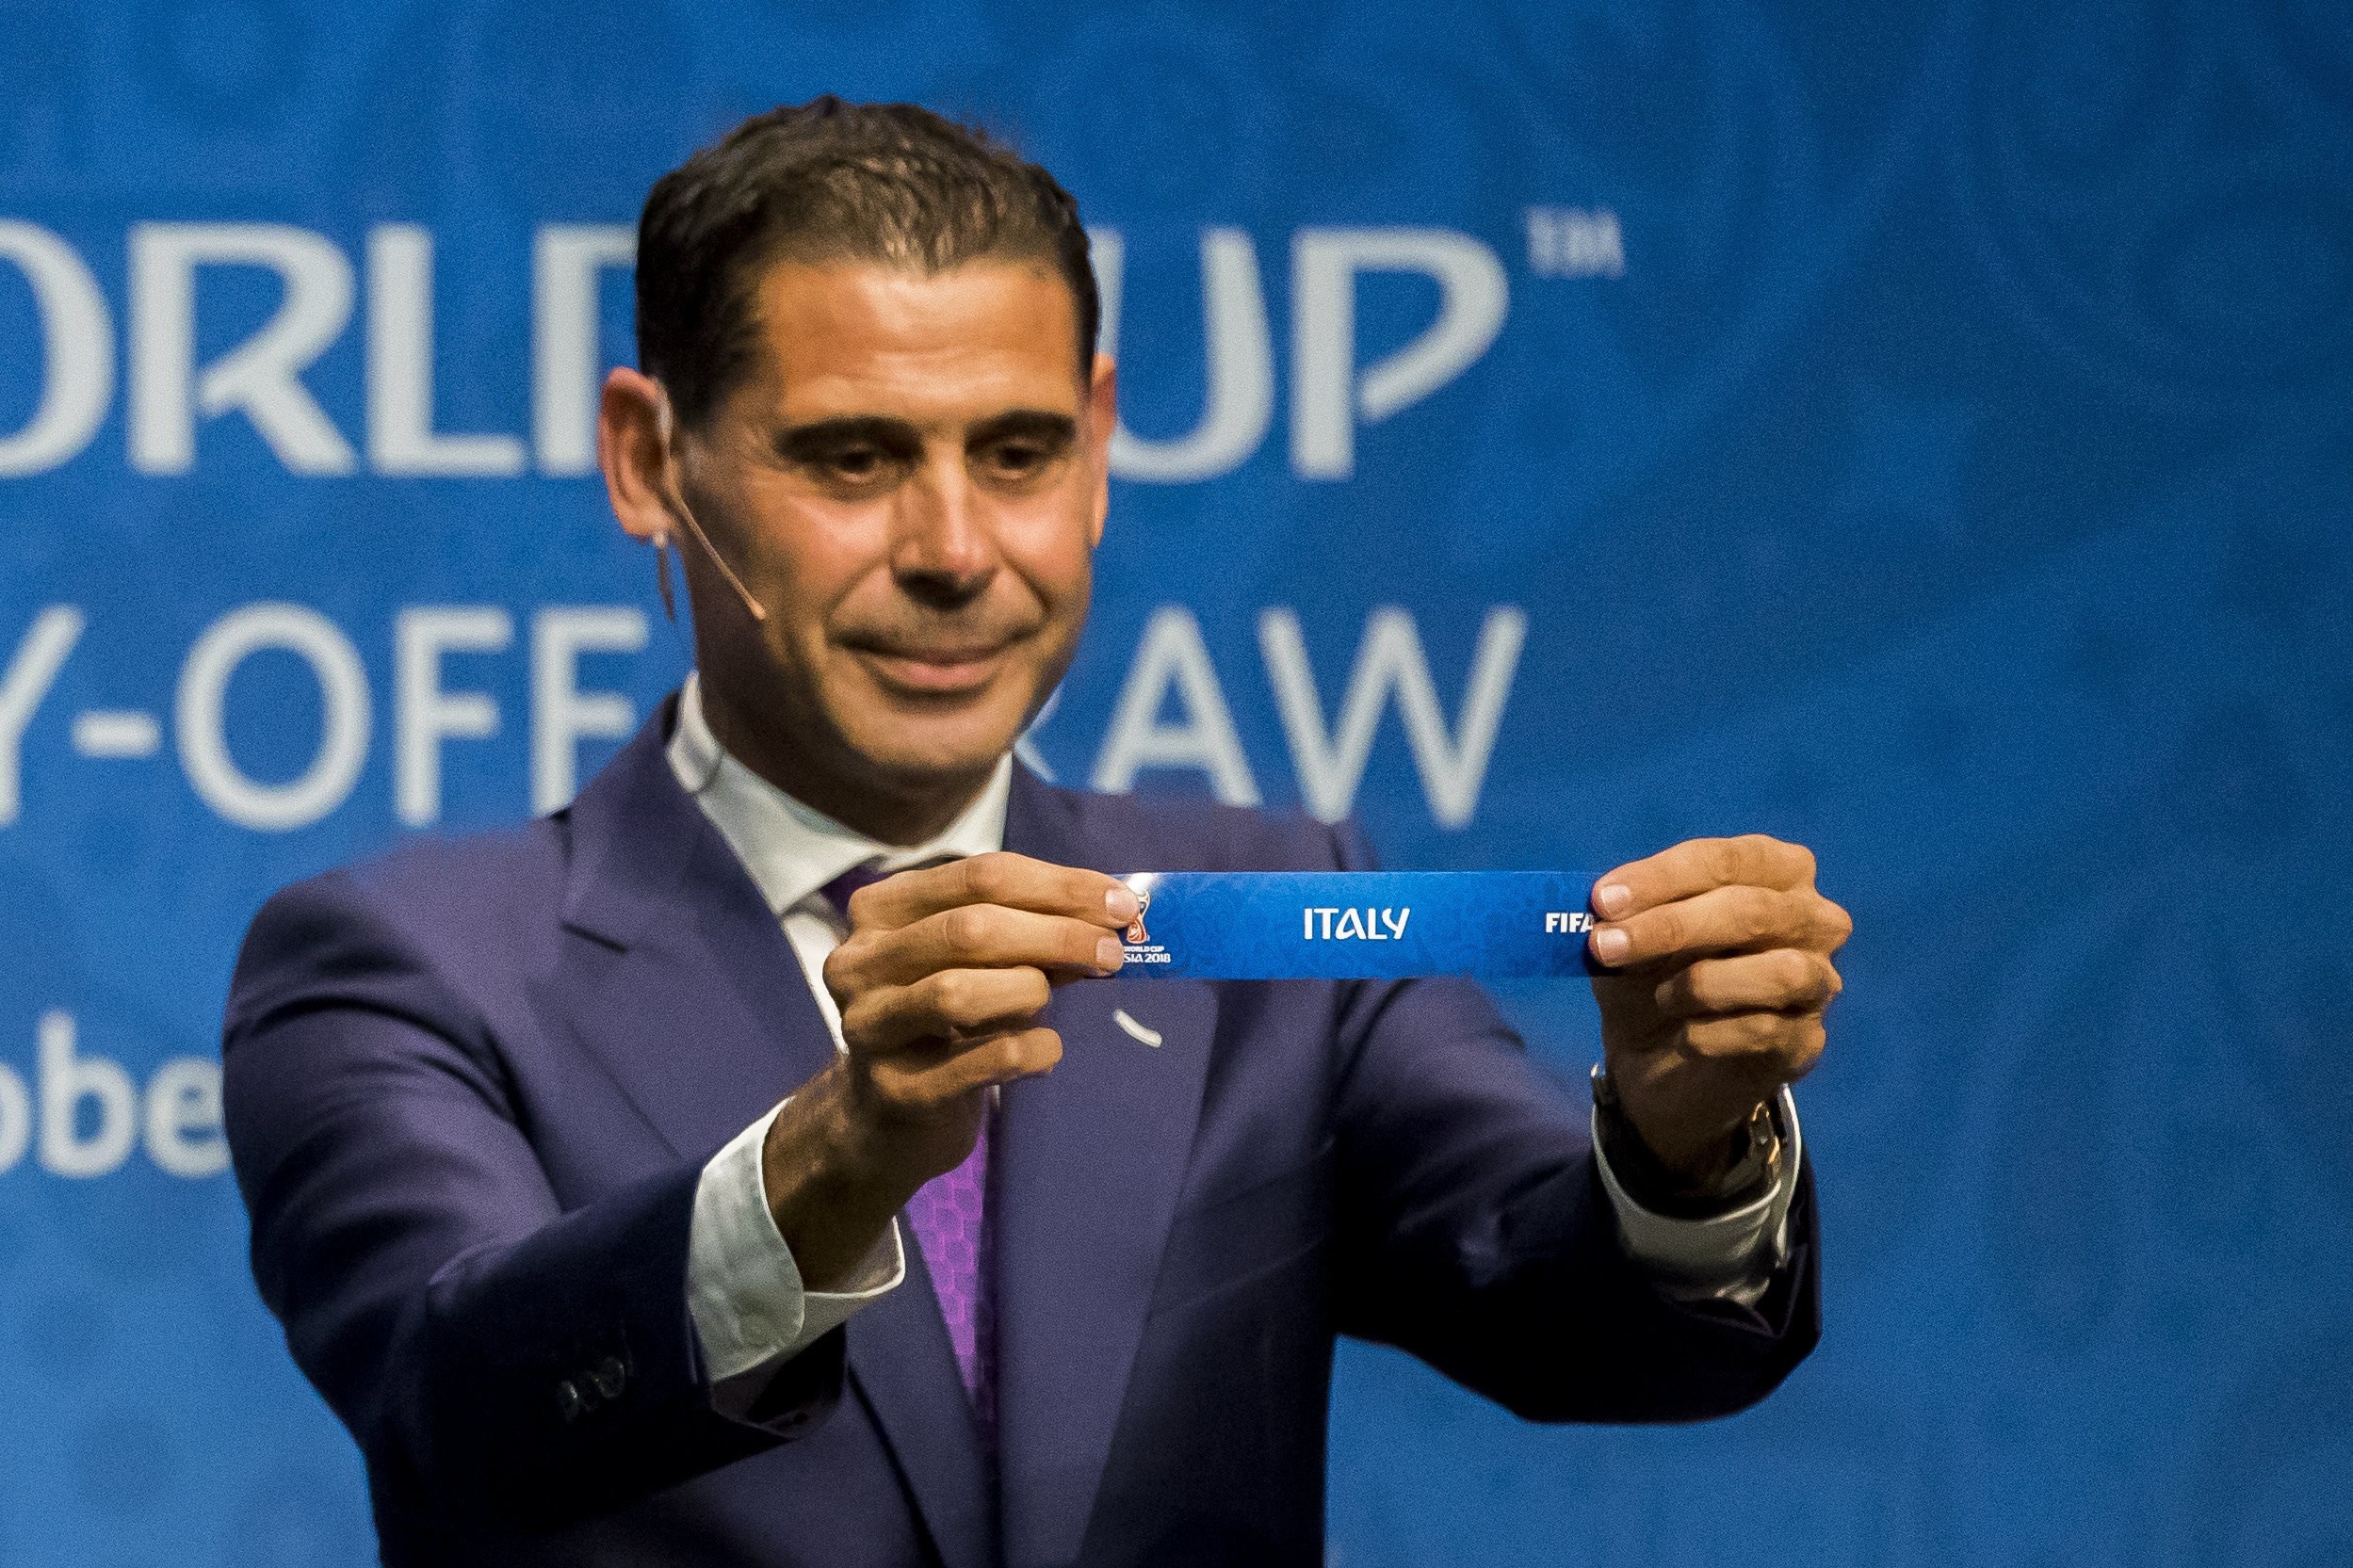 Former Spain player Fernando Hierro shows the lot of Italy during the 2018 World Cup European play-off draw in Switzerland. Photo: EPA